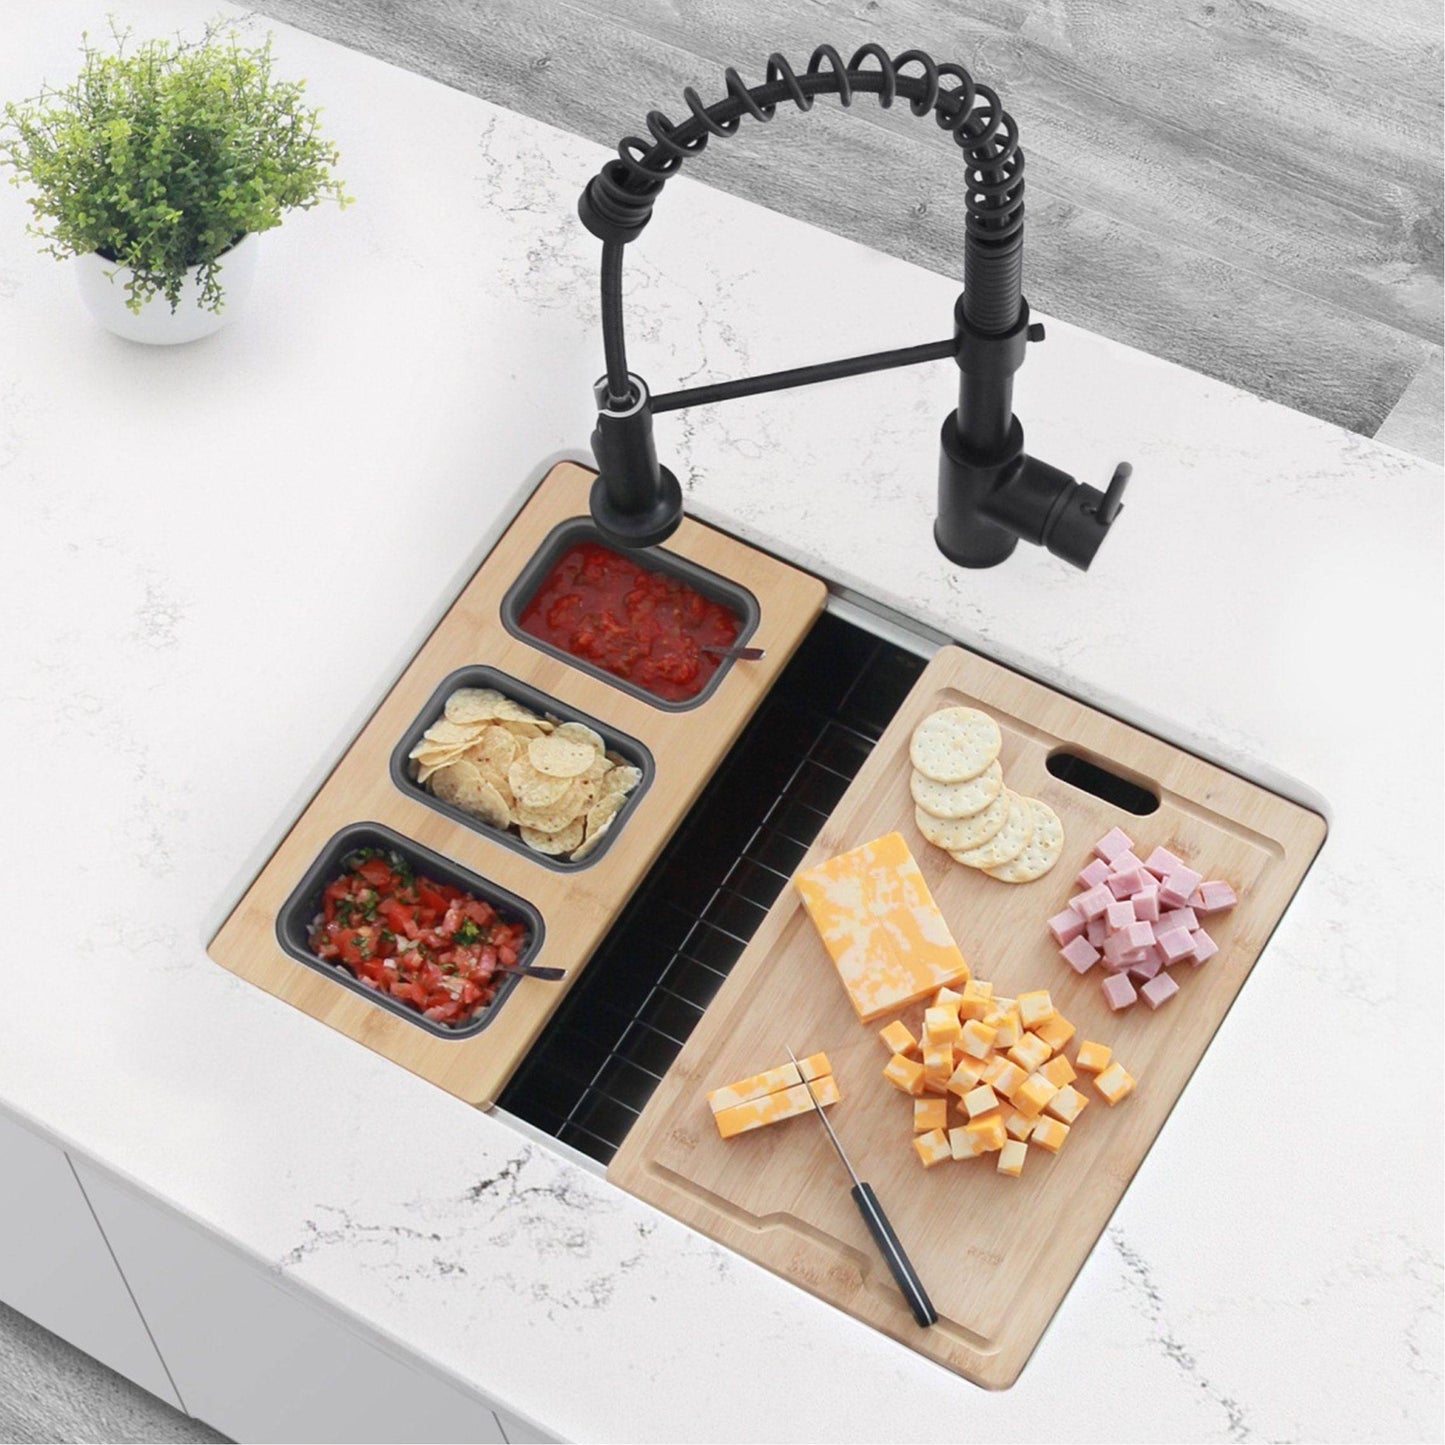 Stylish Workstation Serving Board With 3 Containers A-908 - Renoz